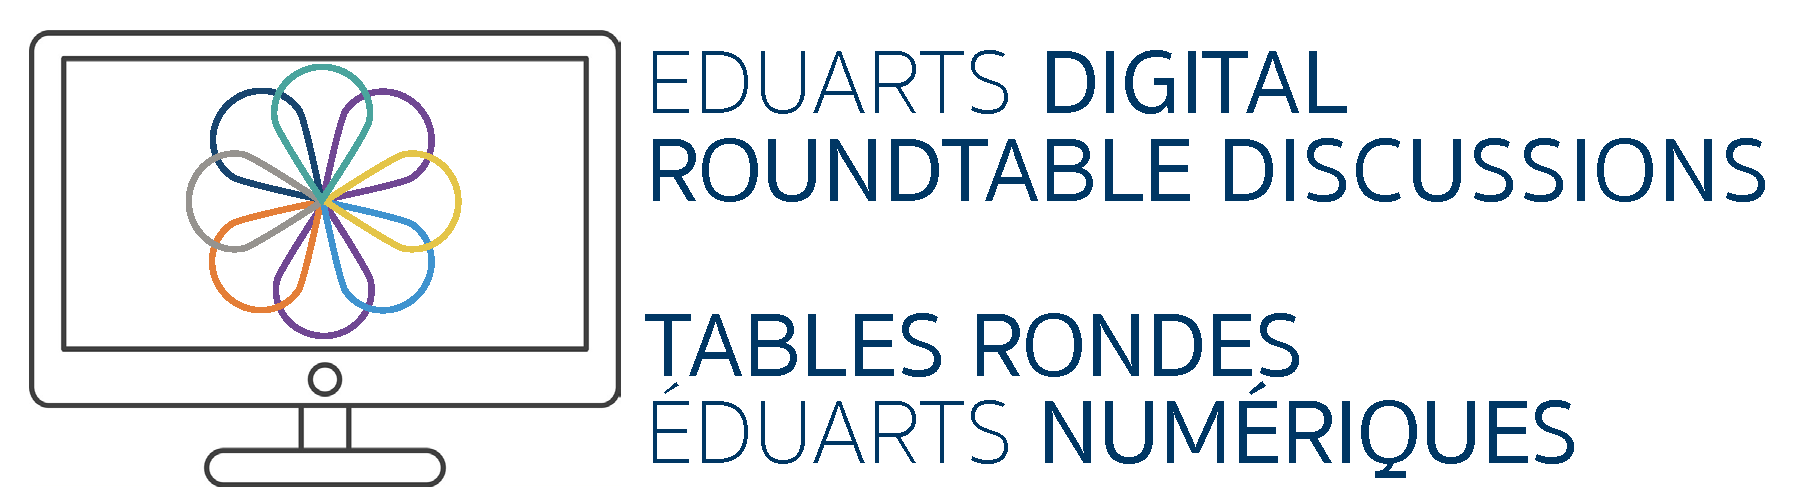 Roundtable Discussion Series